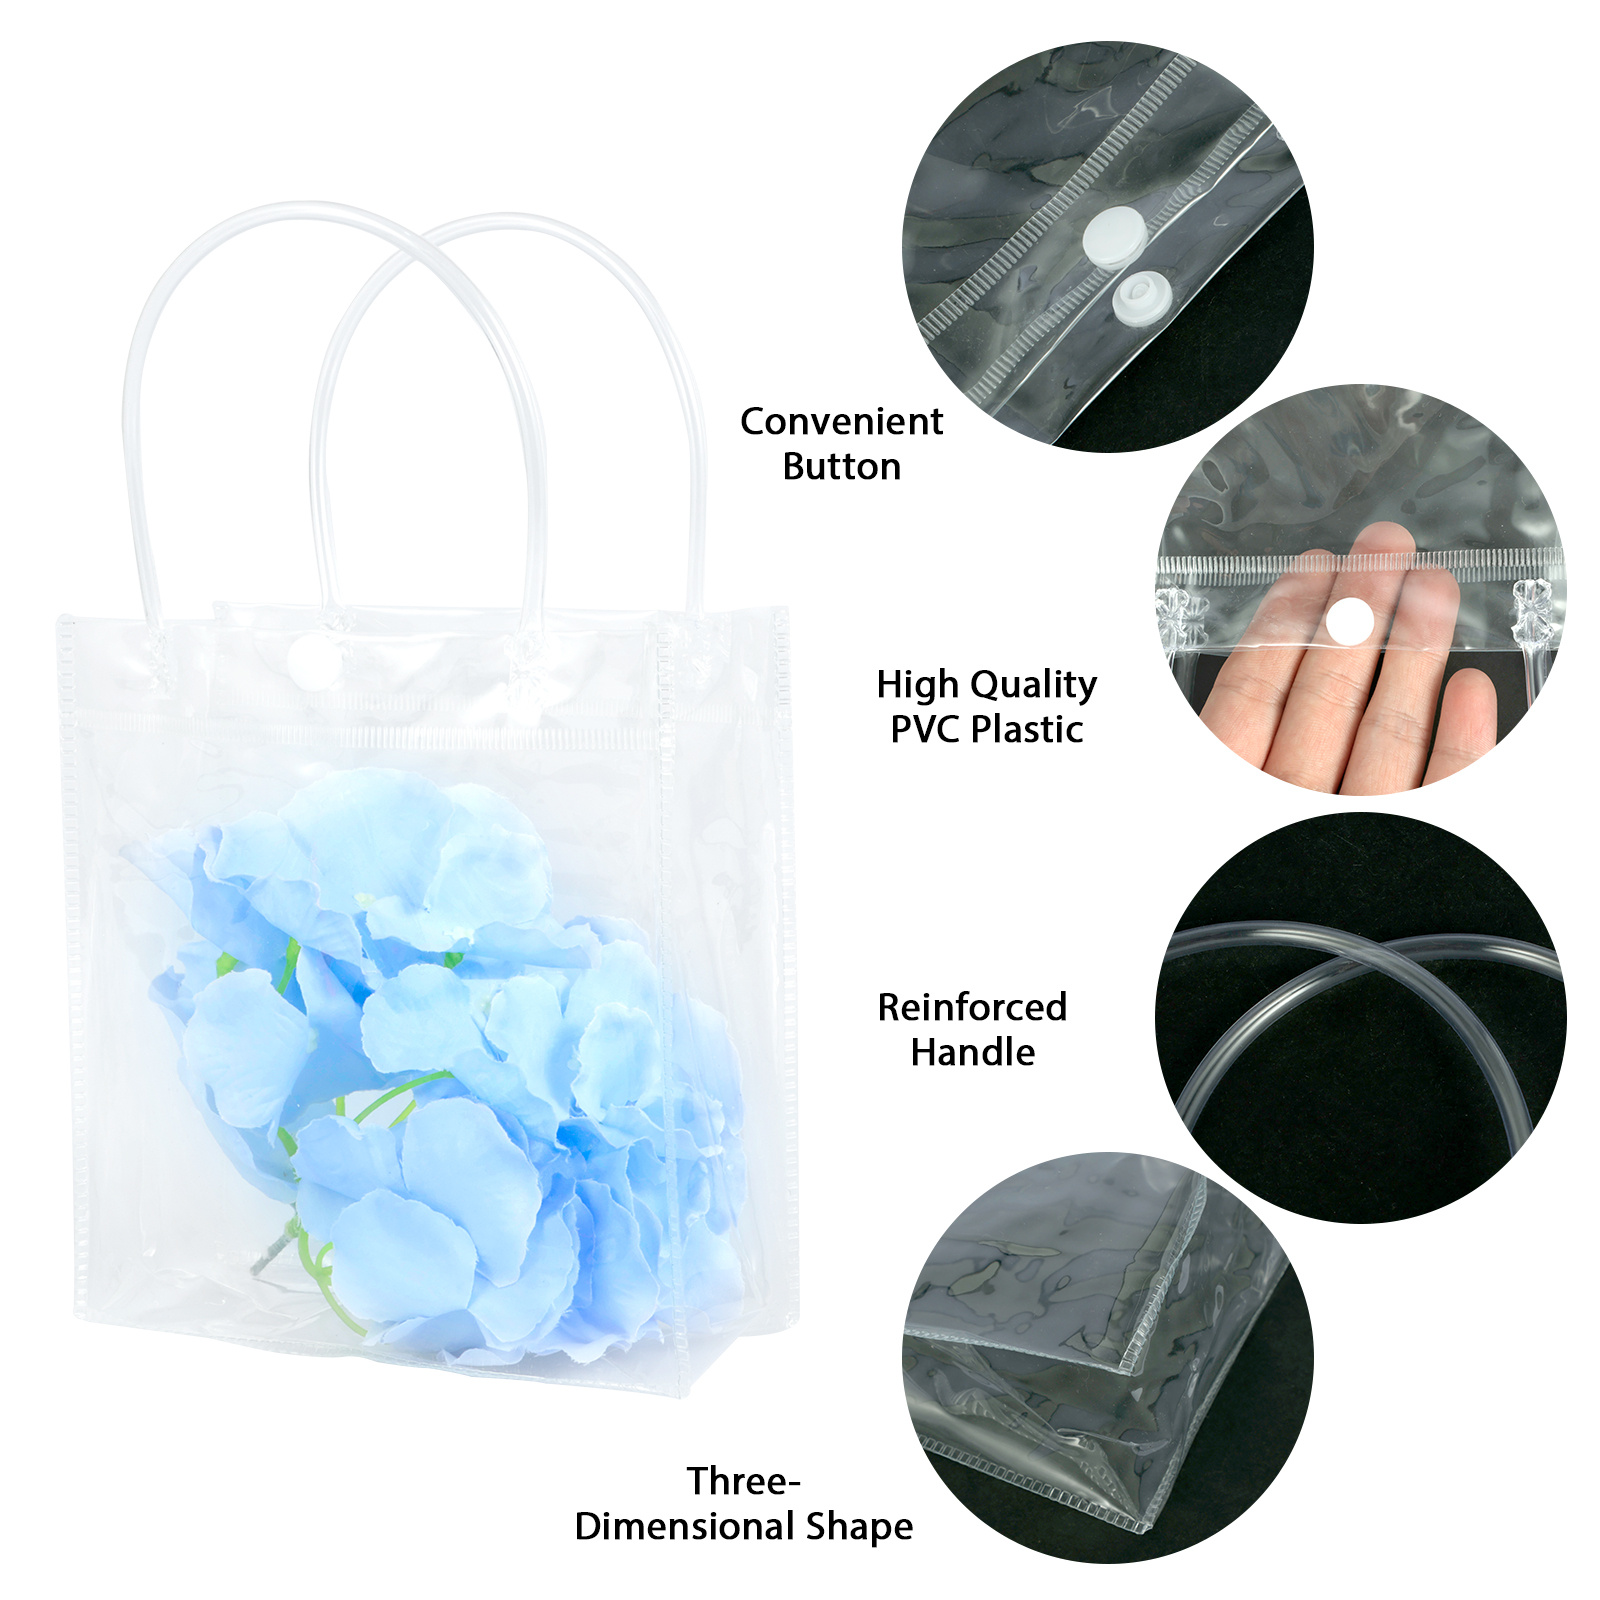 Clear Plastic Gift Bags With Handle, Reusable Clear Pvc Plastic